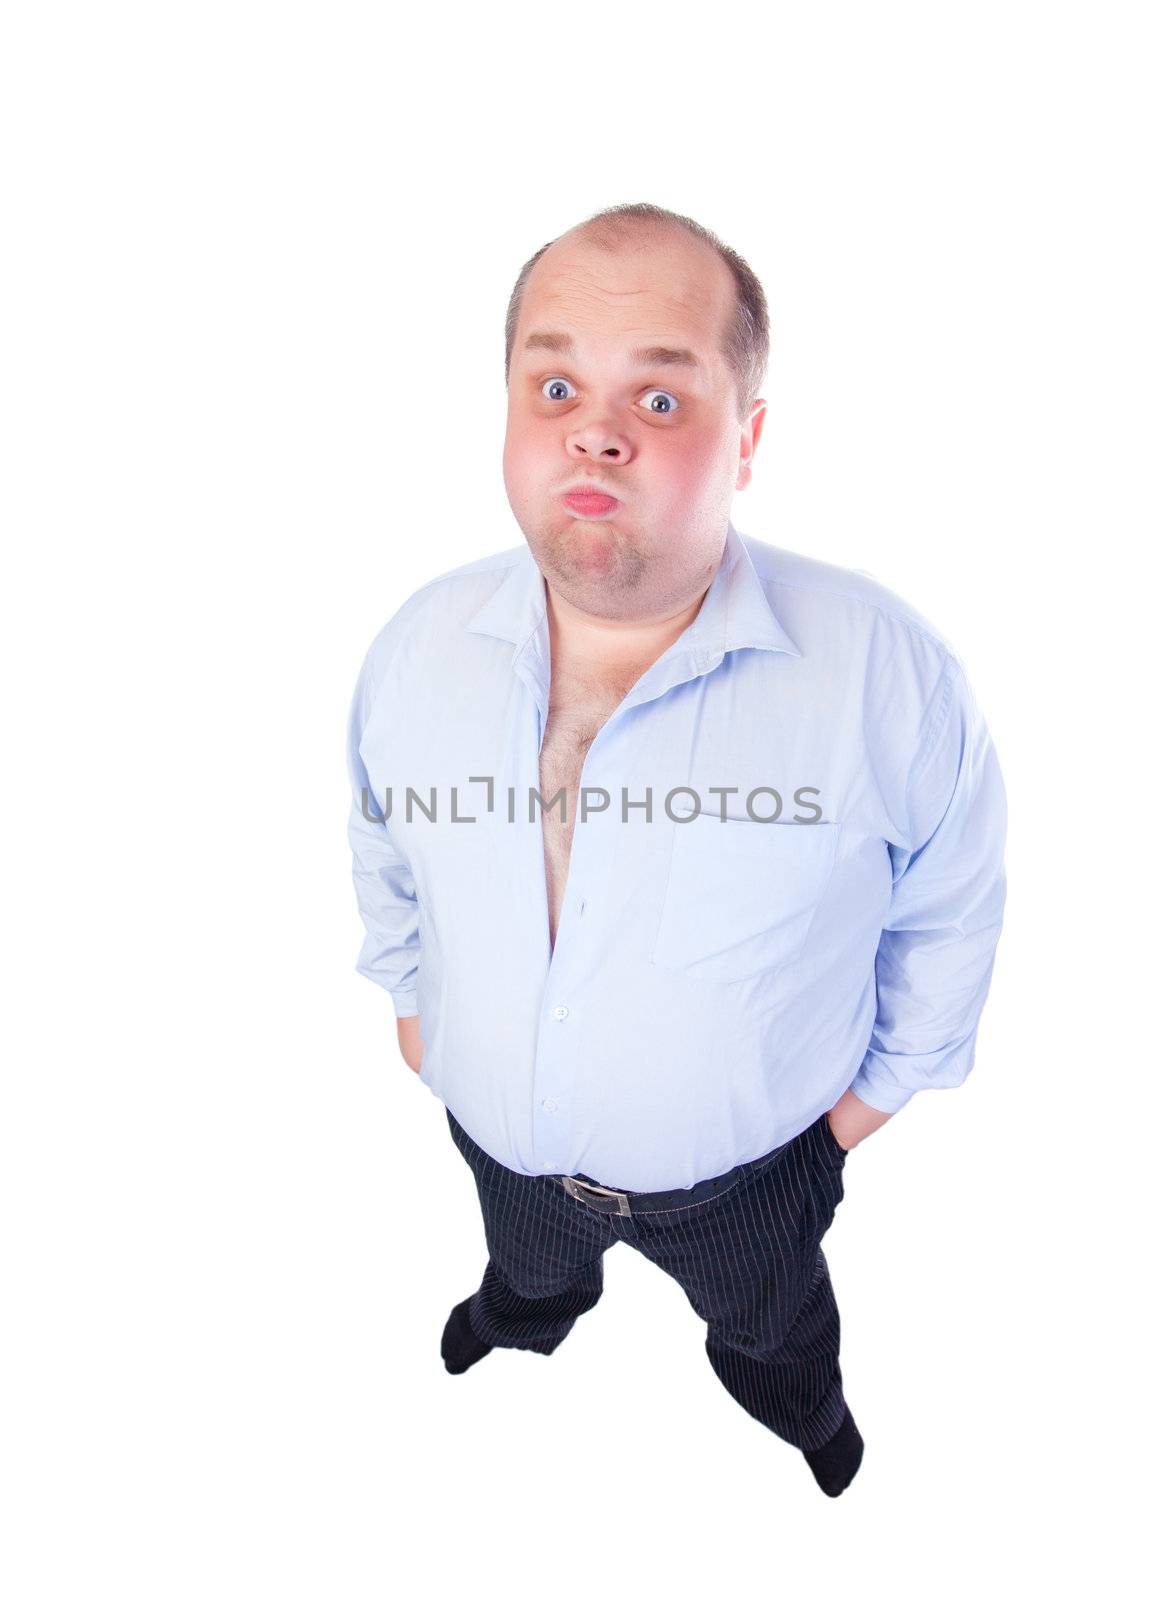 Fat Man in a Blue Shirt, Contorts Antics, wide-angle top view by Discovod